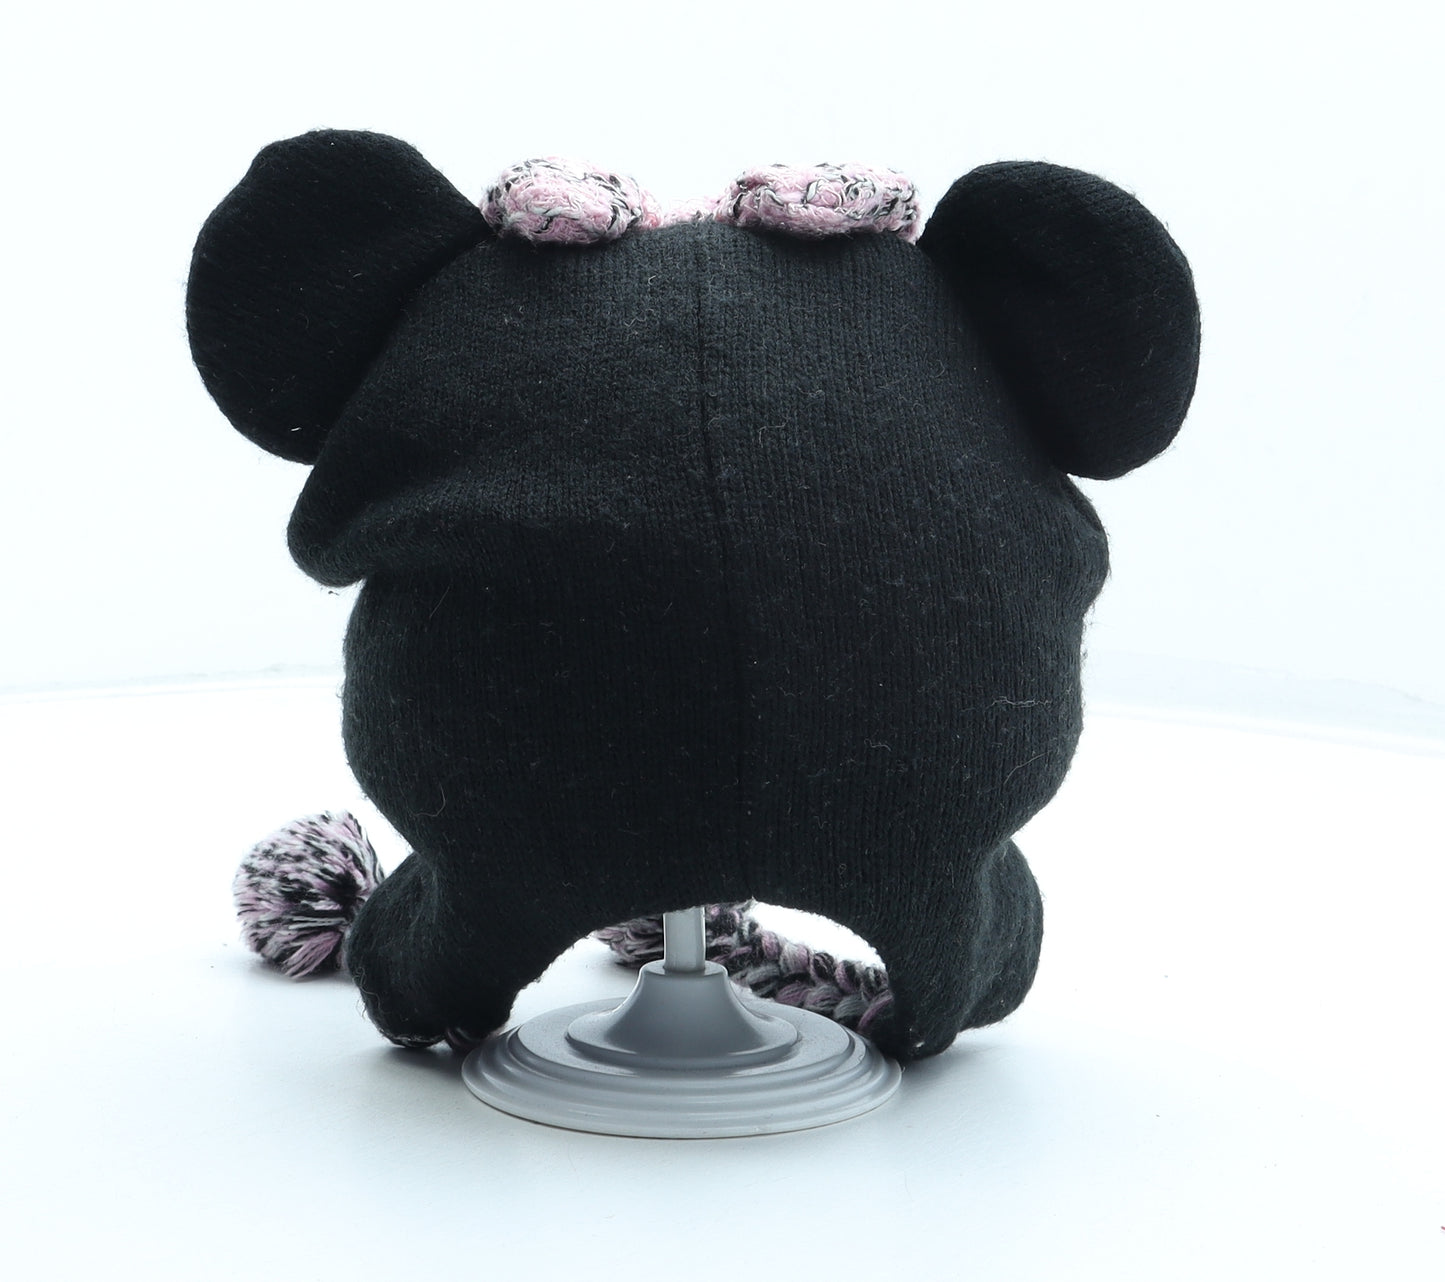 Young Dimension Girls Black Acrylic Winter Hat One Size - Minnie Mouse Pom Pom